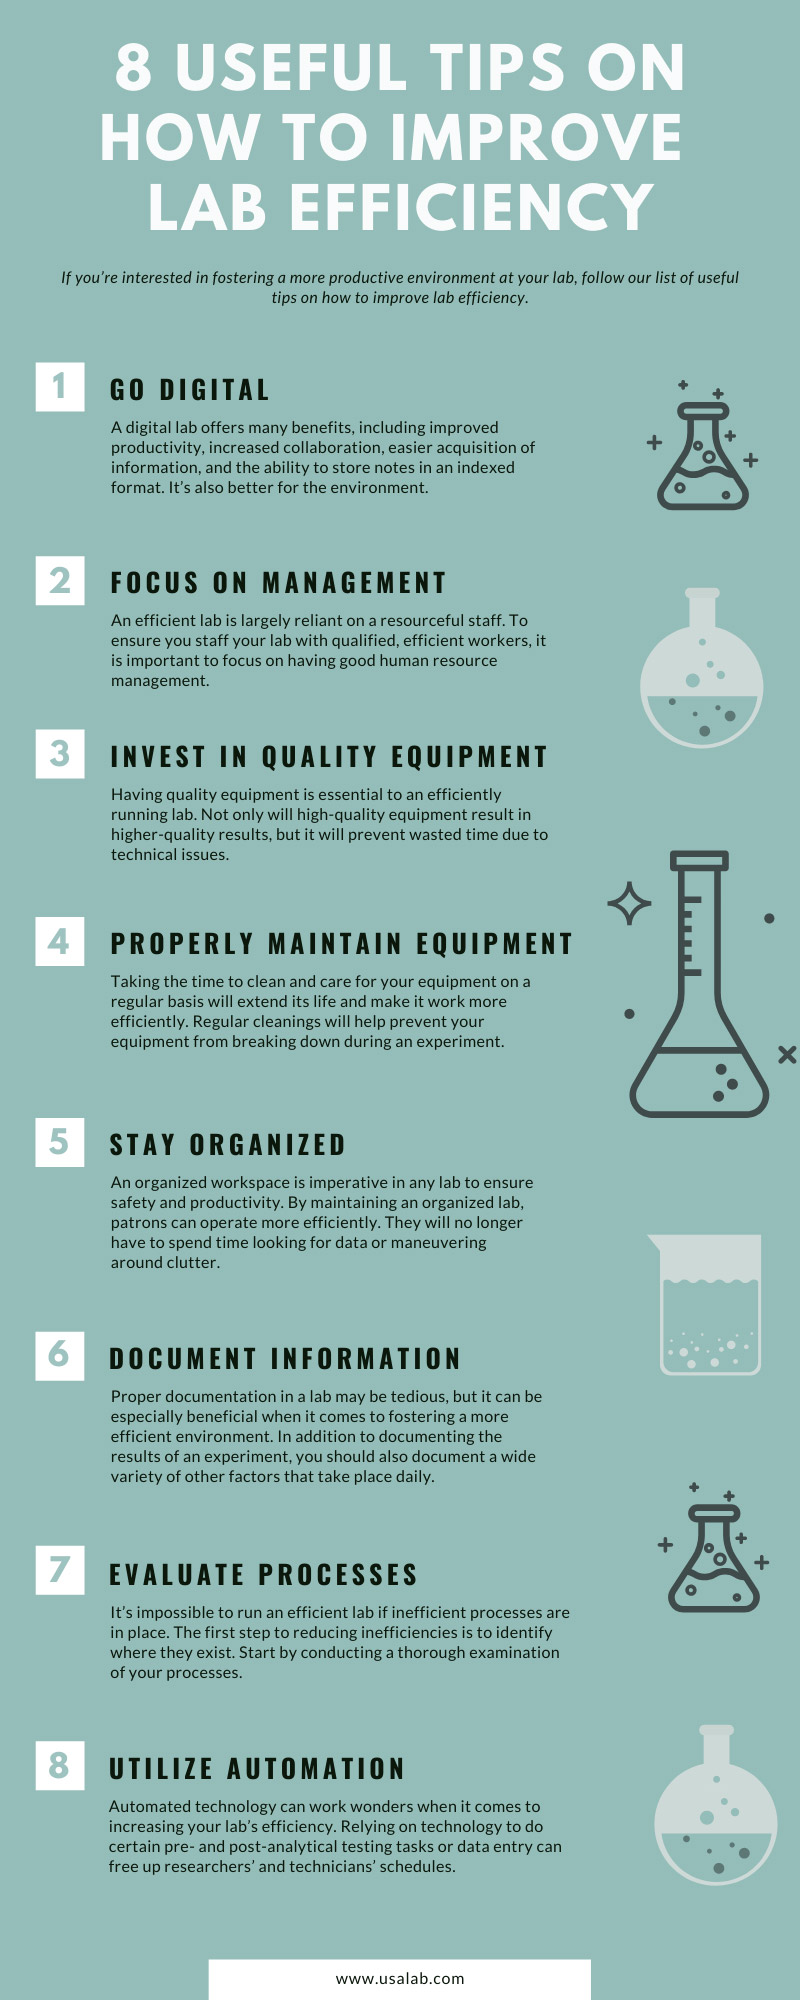 8 Useful Tips on How to Improve Lab Efficiency